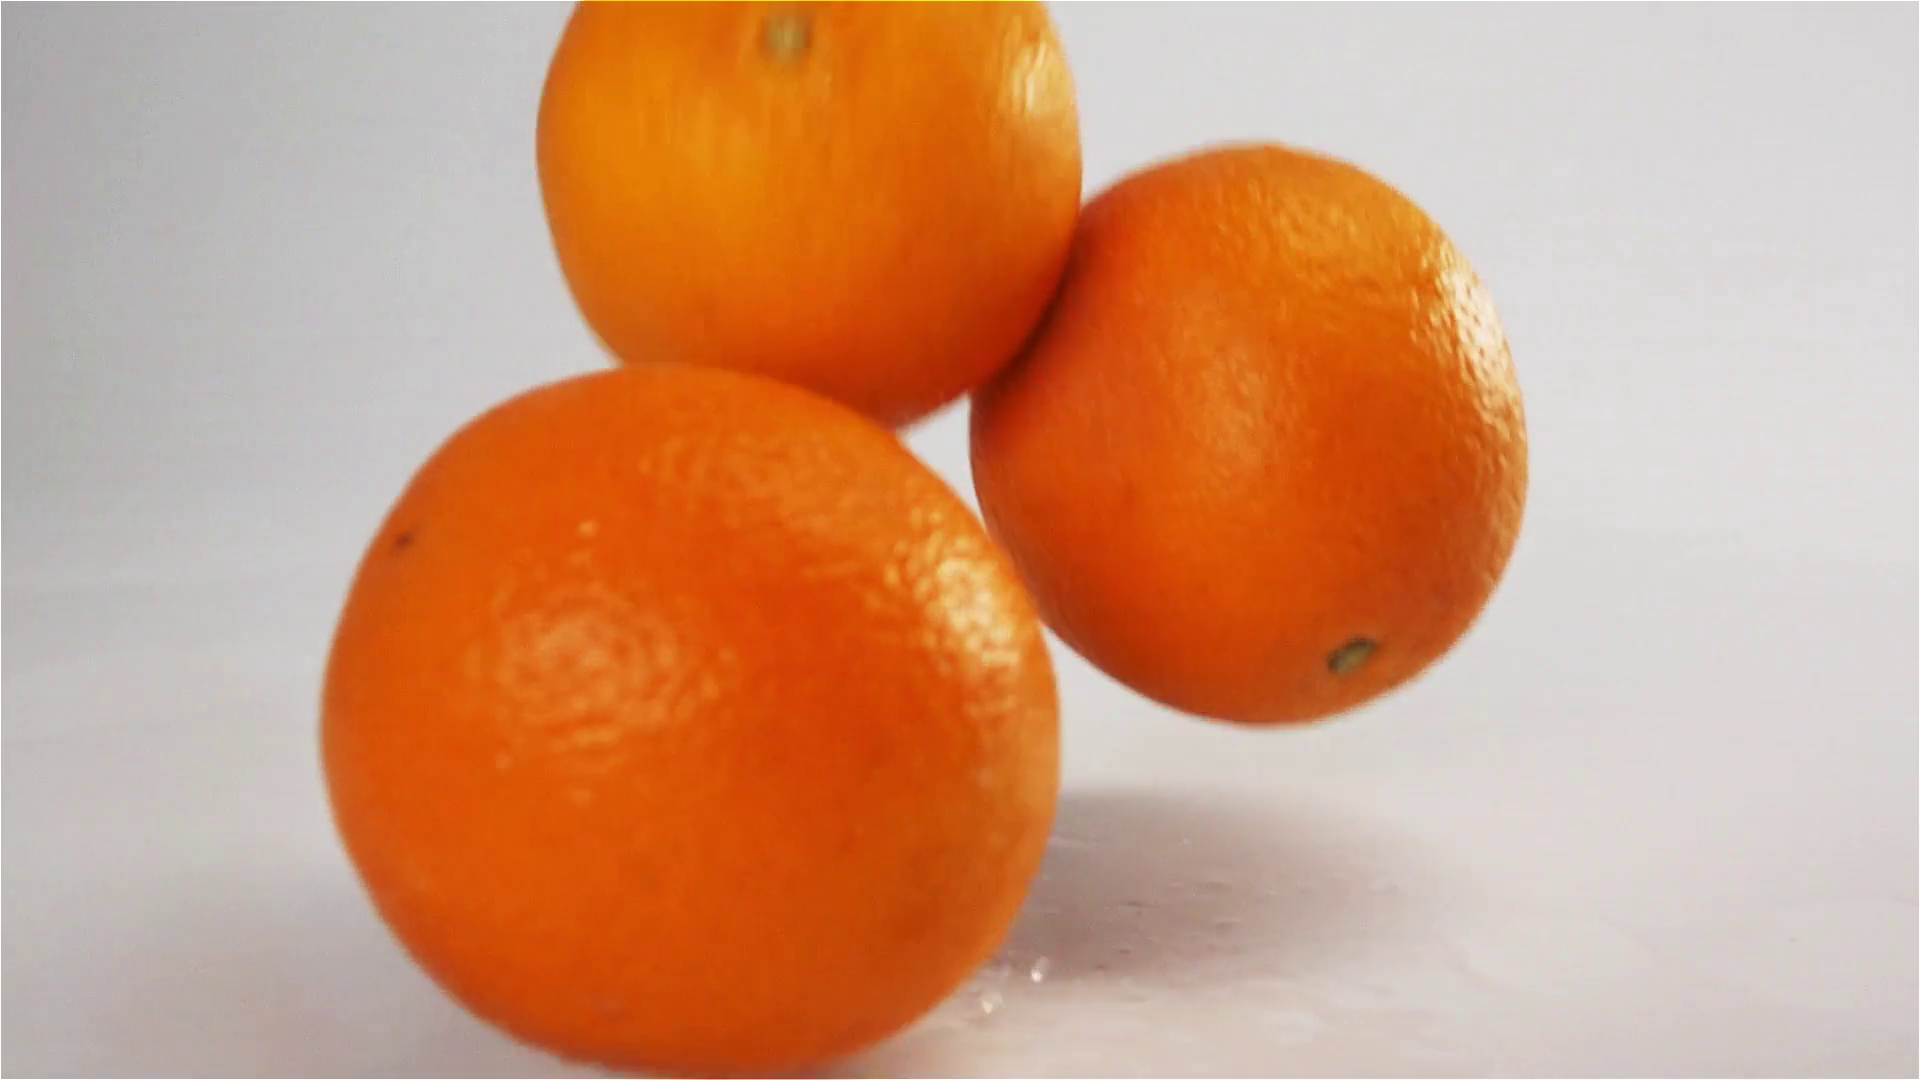 Fresh tasty Oranges fall and bounce on white wet surface with splash ...